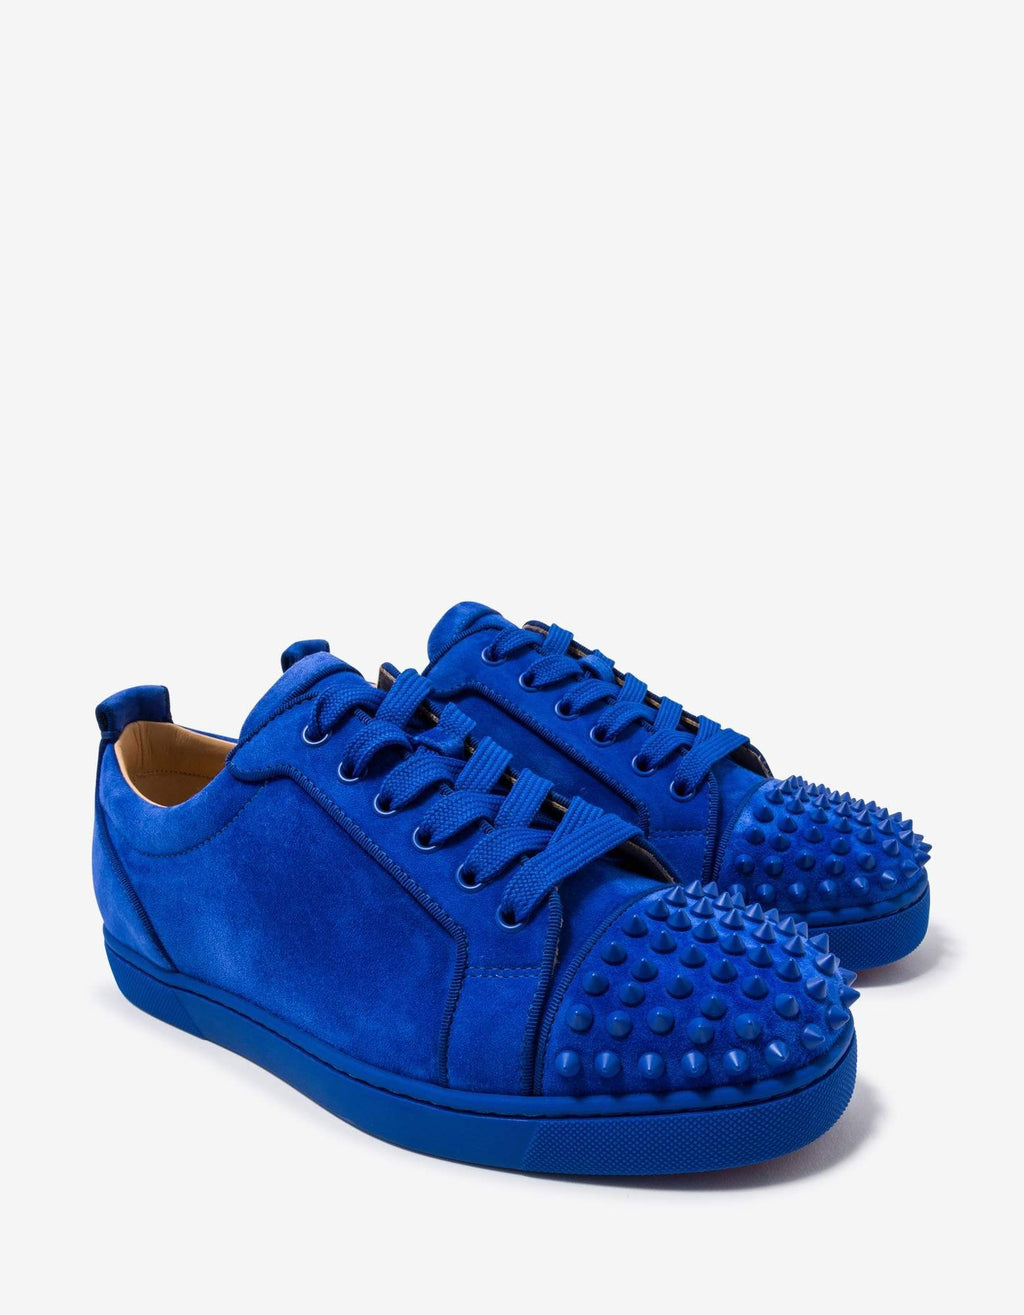 Christian Louboutin Christian Louboutin Louis Junior Spikes Orlato Blue Suede Trainers